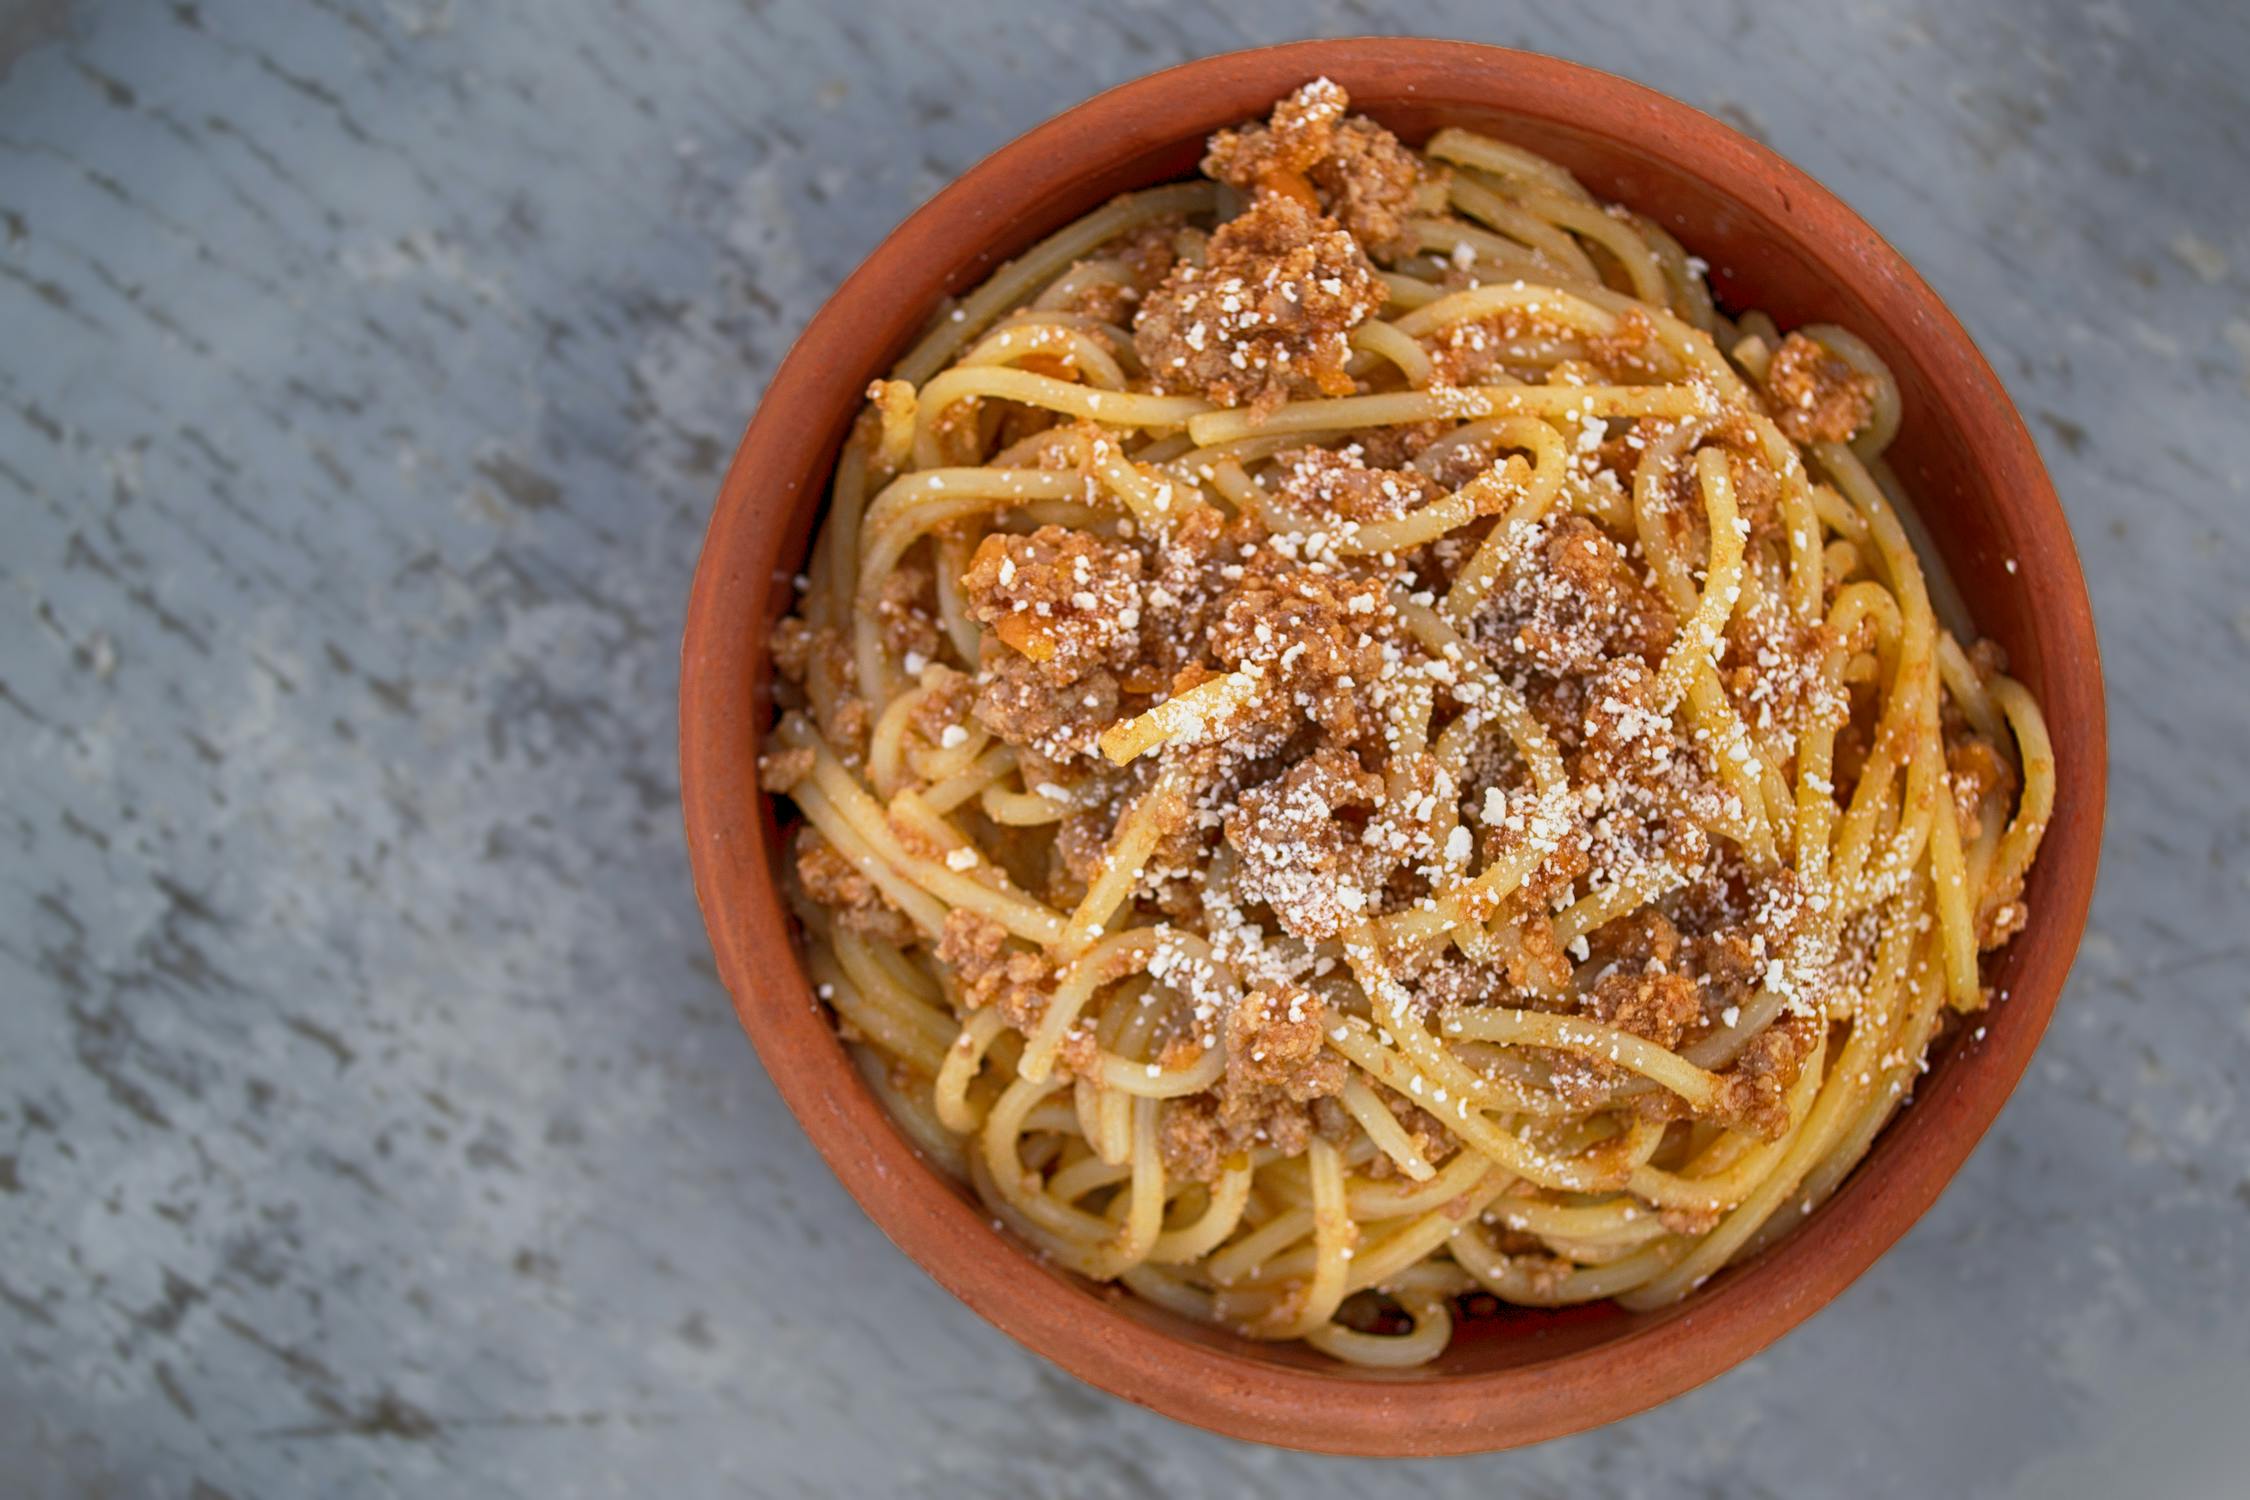 bowl of spaghetti covered in parmesan cheese on grey countertop